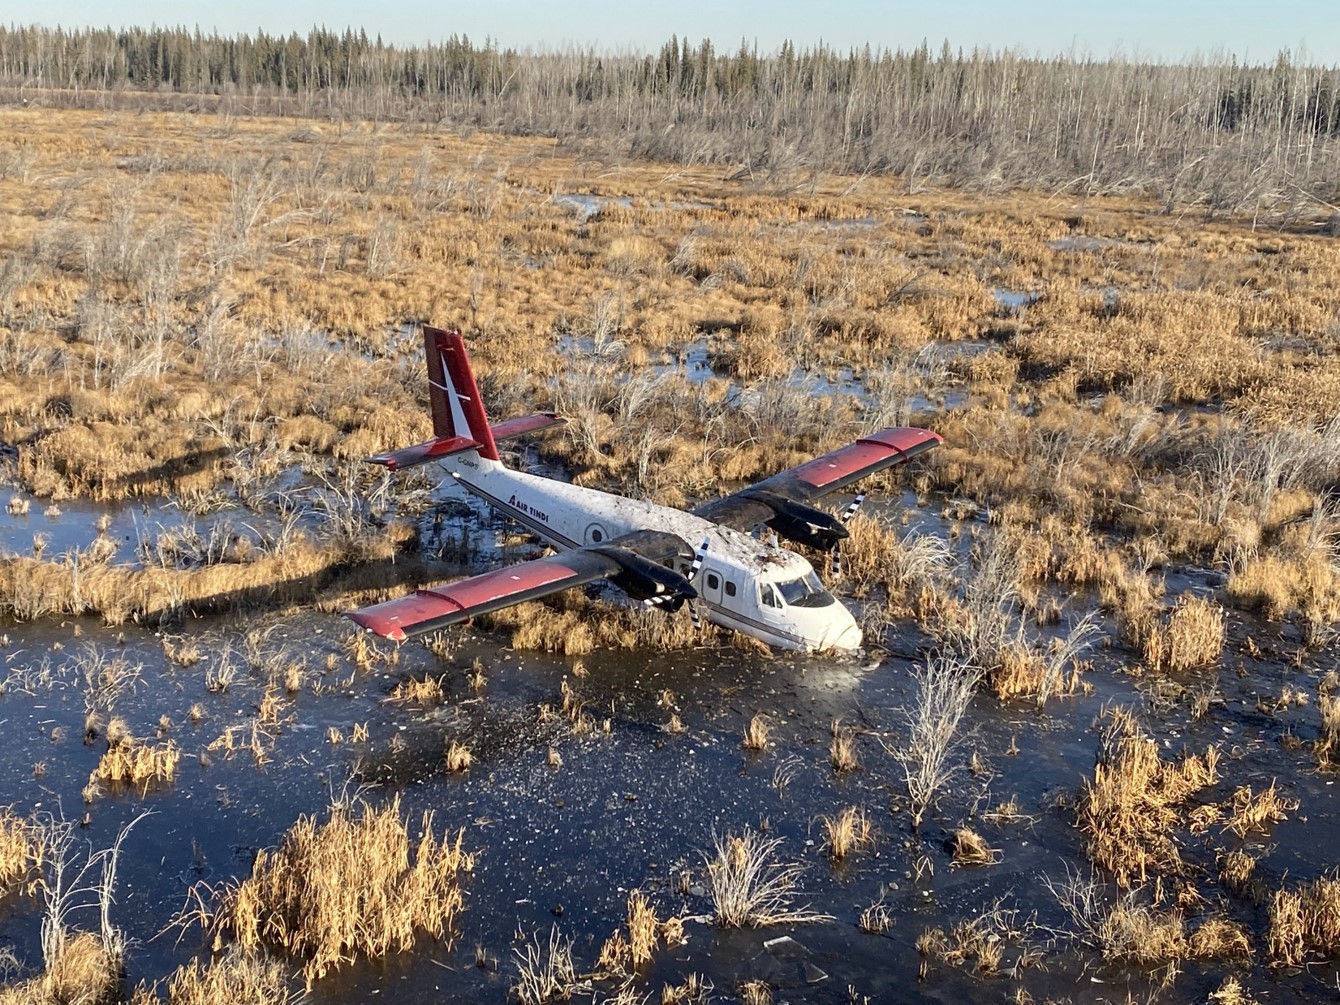 Photo of the occurrence aircraft after the forced landing in the muskeg, looking east (Source: Air Tindi Ltd.)